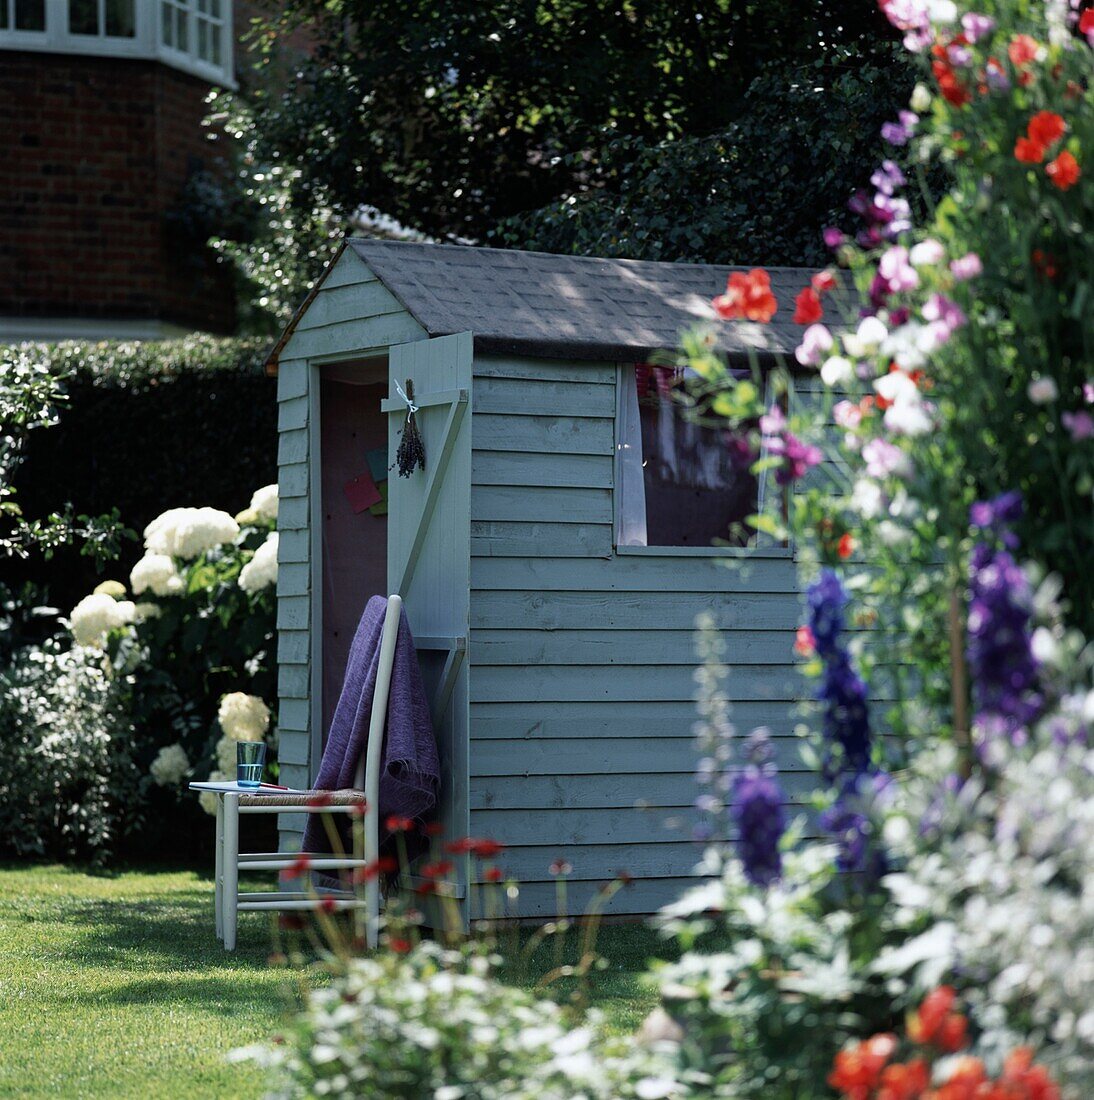 Wooden shed in garden among flowers